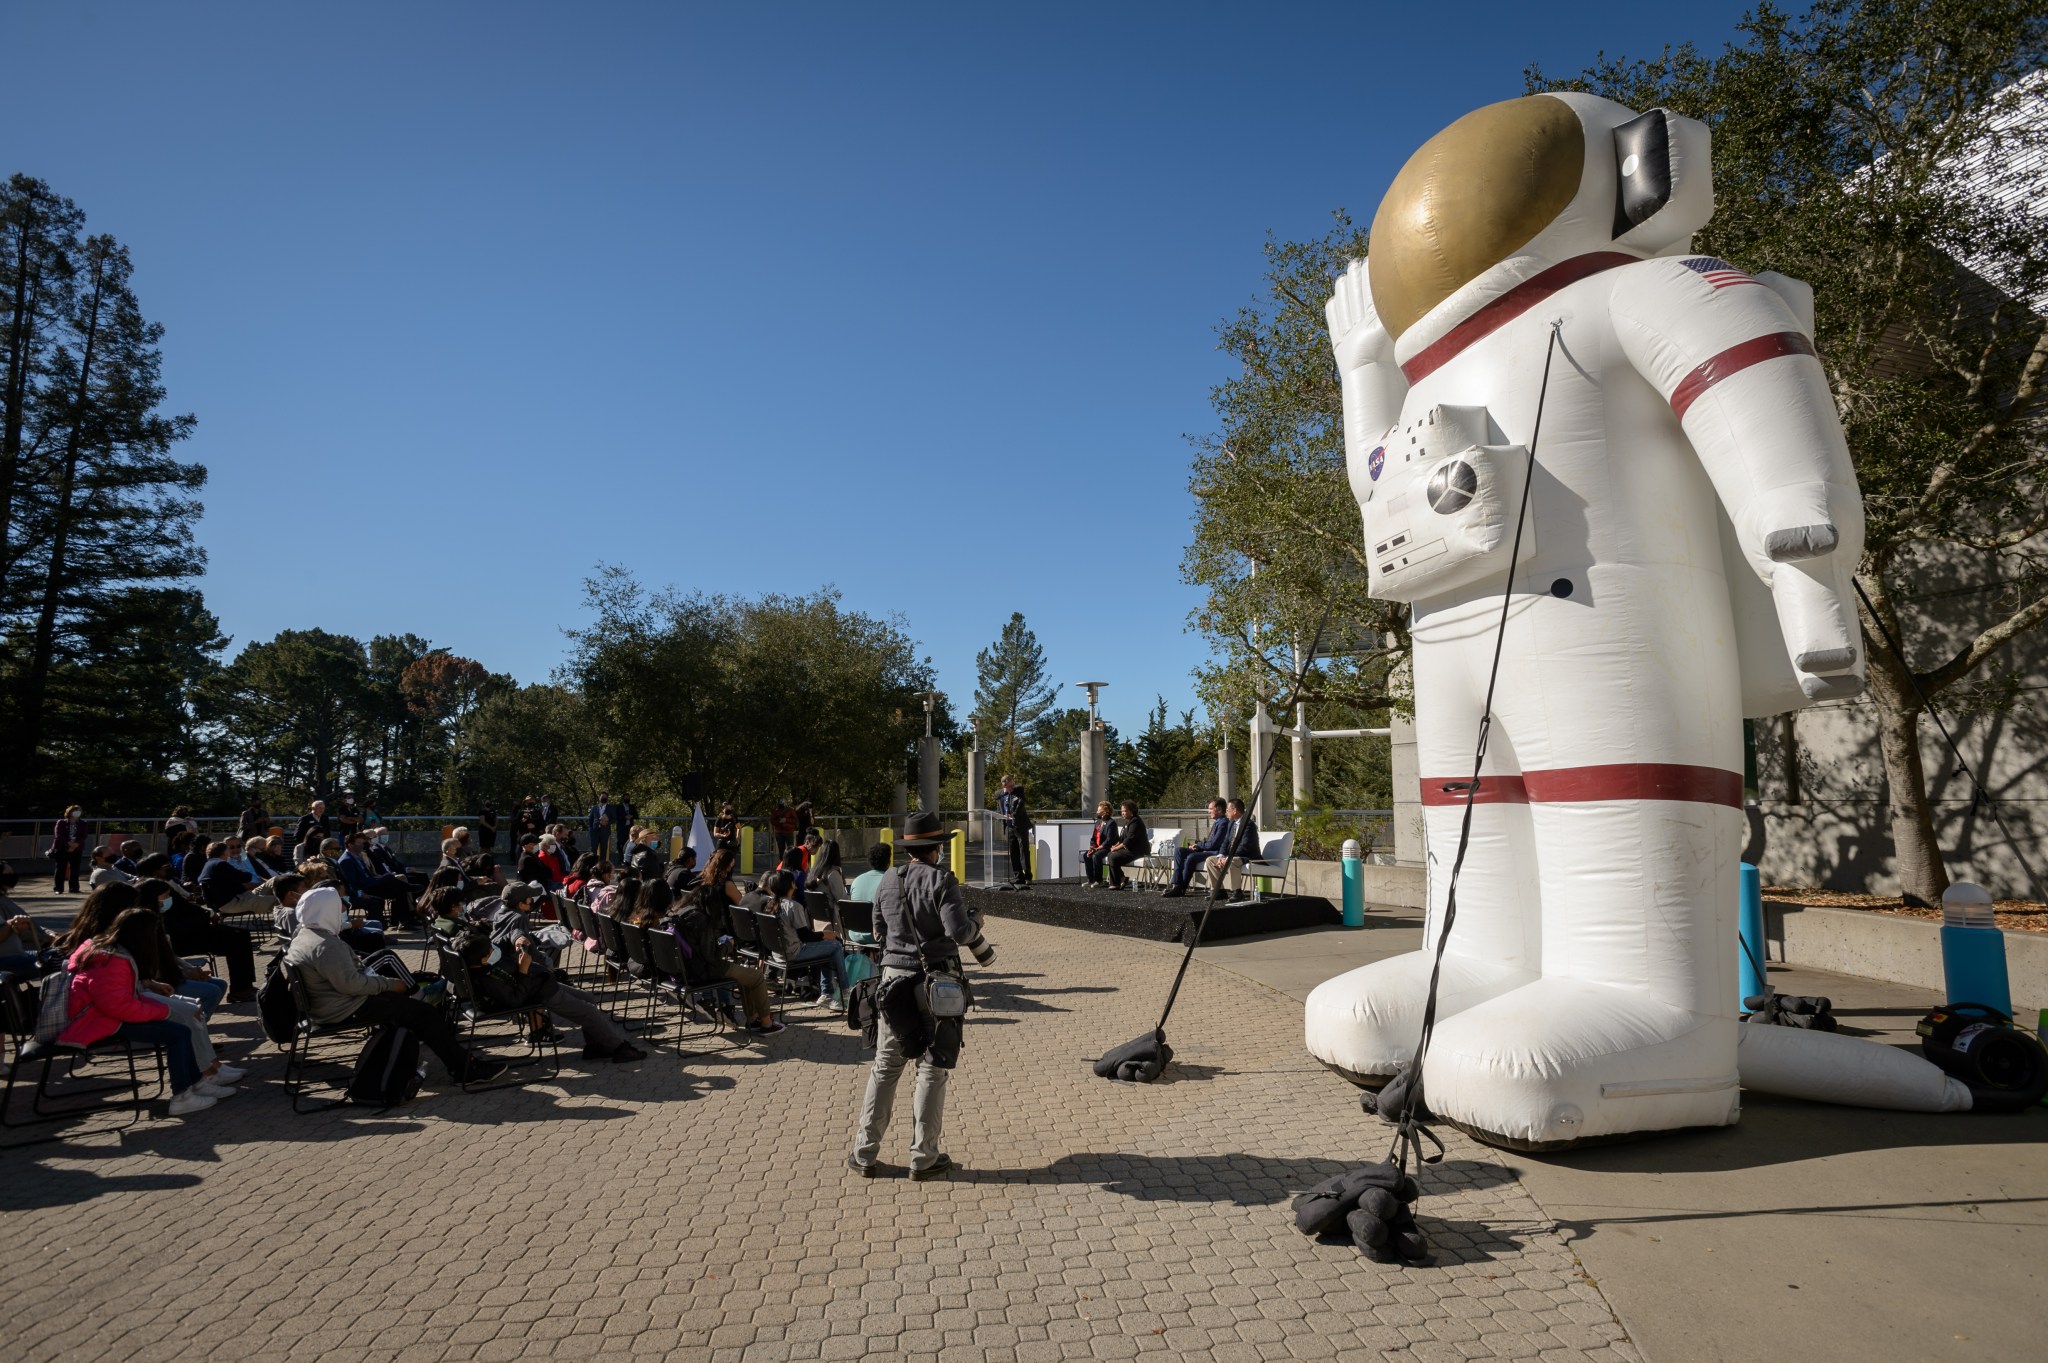 In this view, a giant inflatable model of a spacesuit stands to the right of the audience during an outdoor event at the Chabot Space and Science Center.